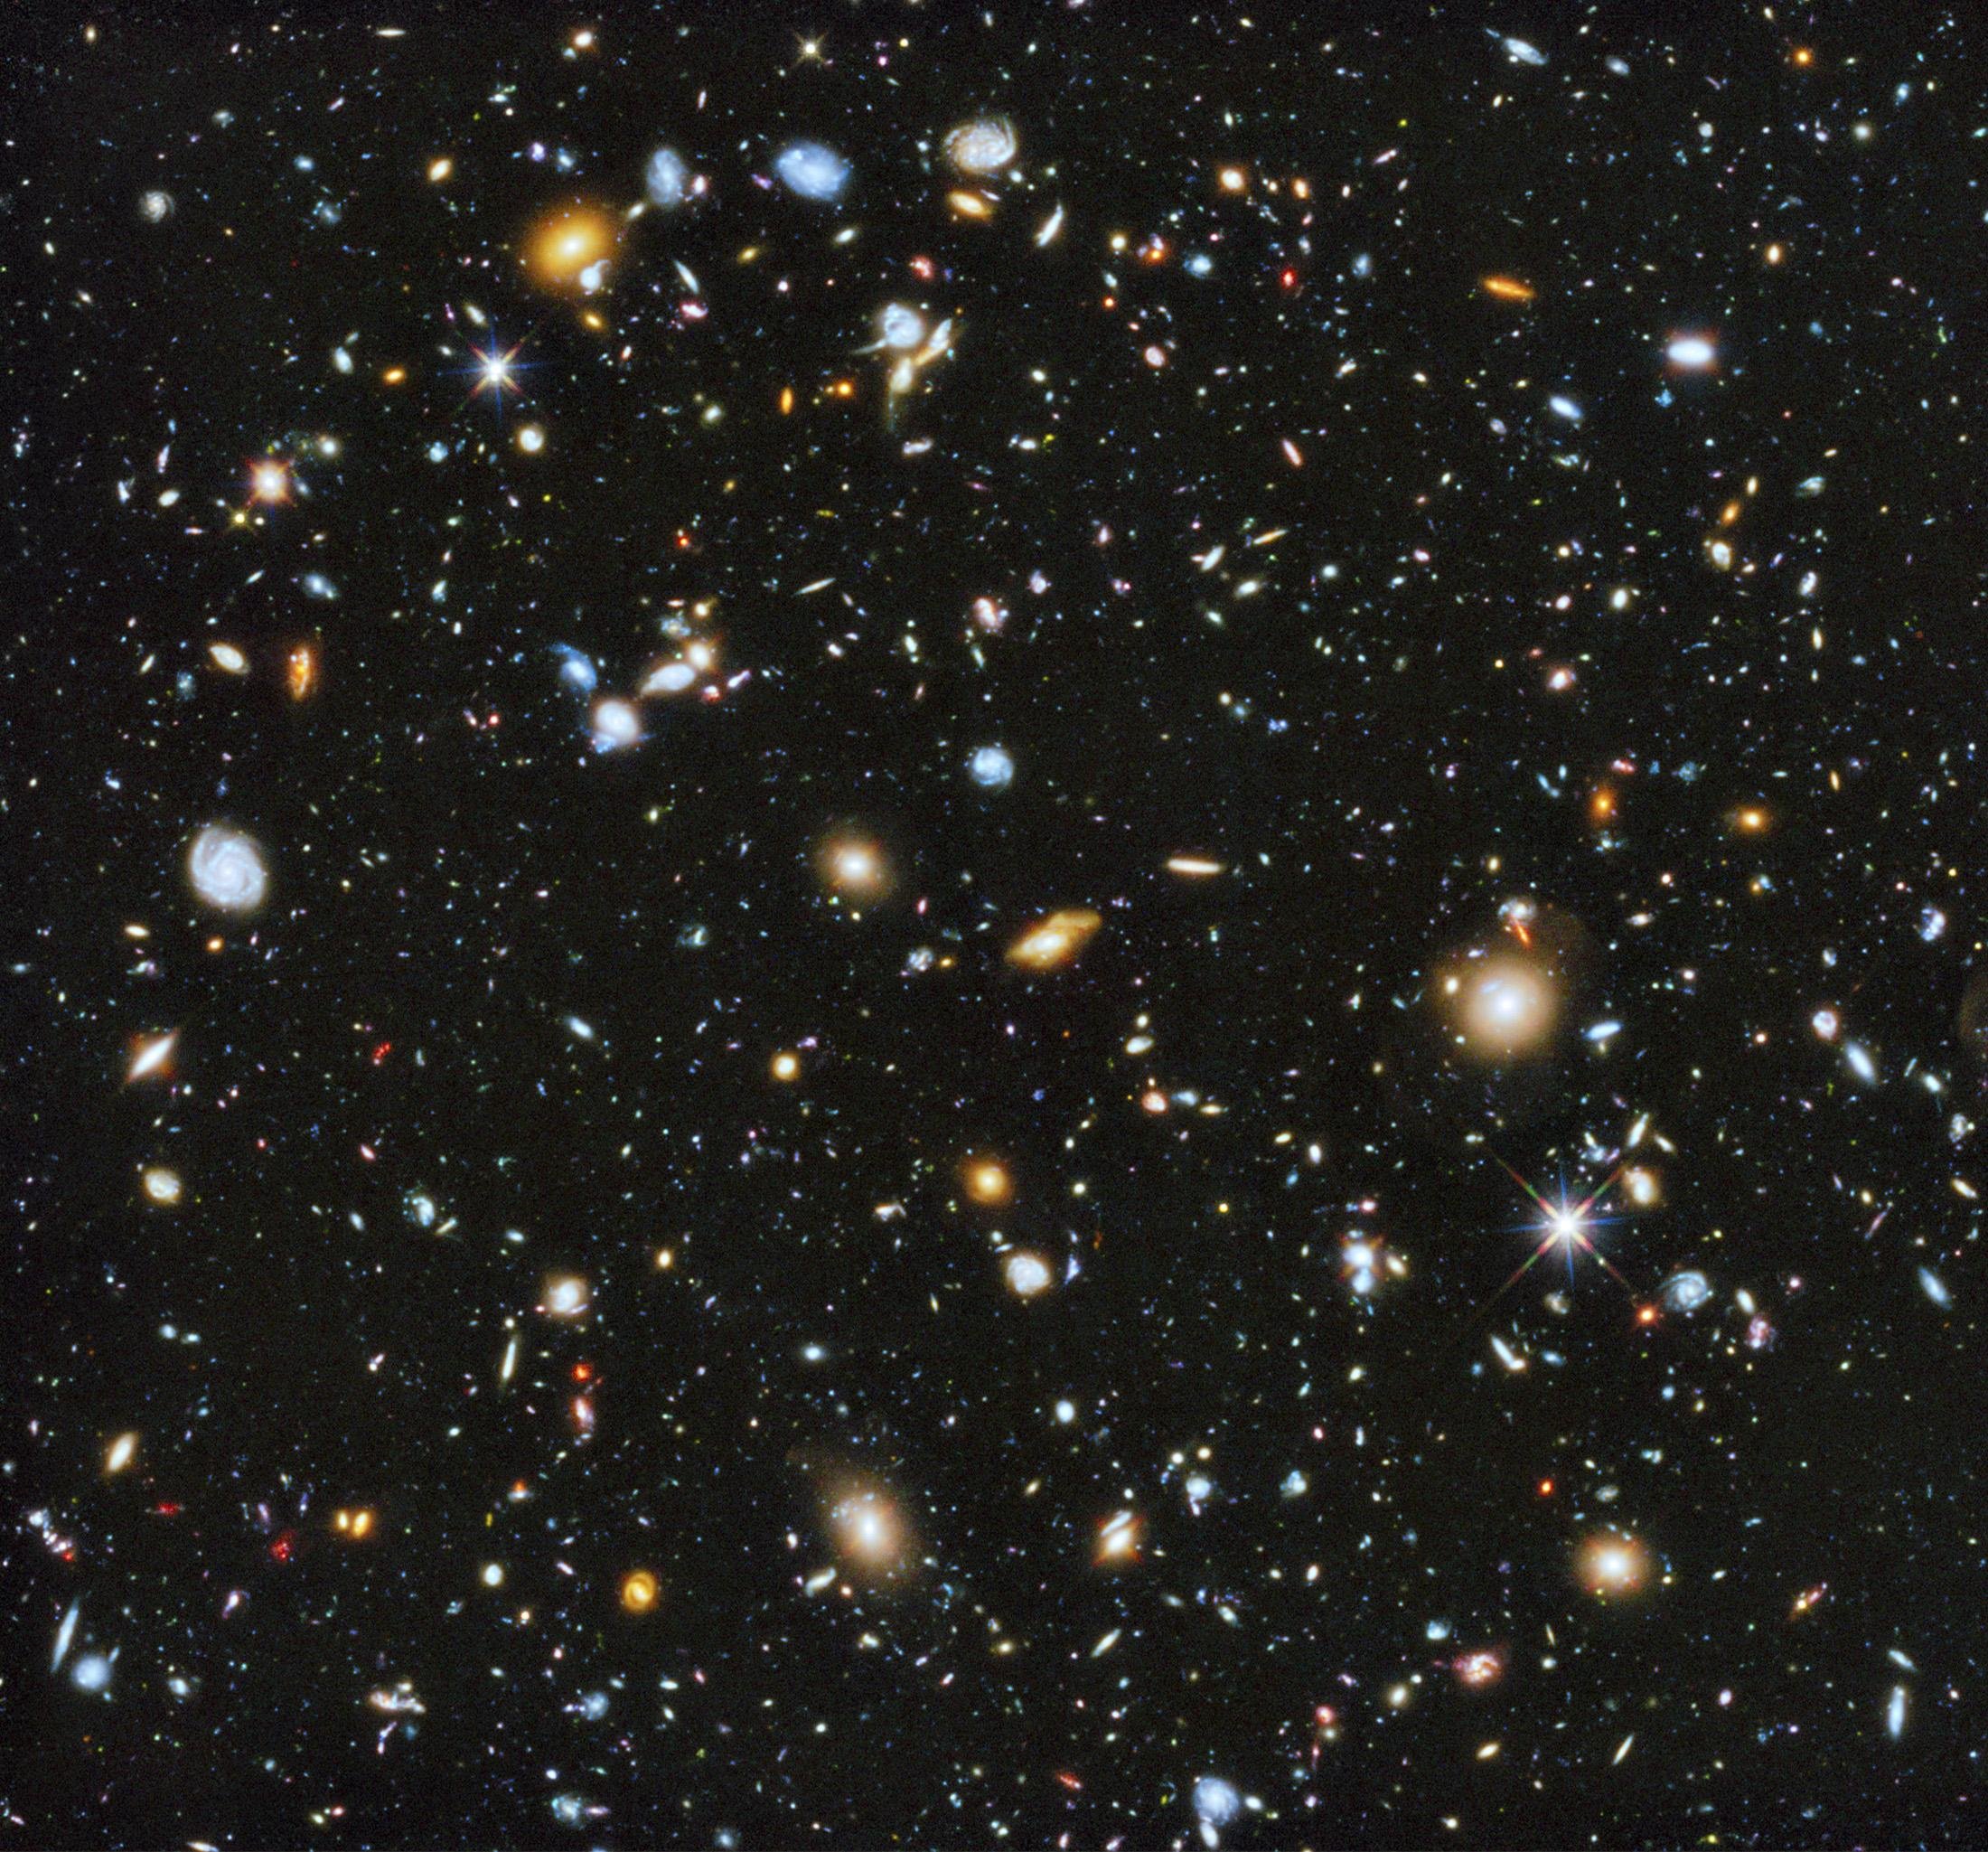 A composite of separate exposures taken in 2003 to 2012 with Hubble's Advanced Camera for Surveys and Wide Field Camera 3 of the evolving universe is shown in this image released on June 3, 2014. (NASA/Reuters)